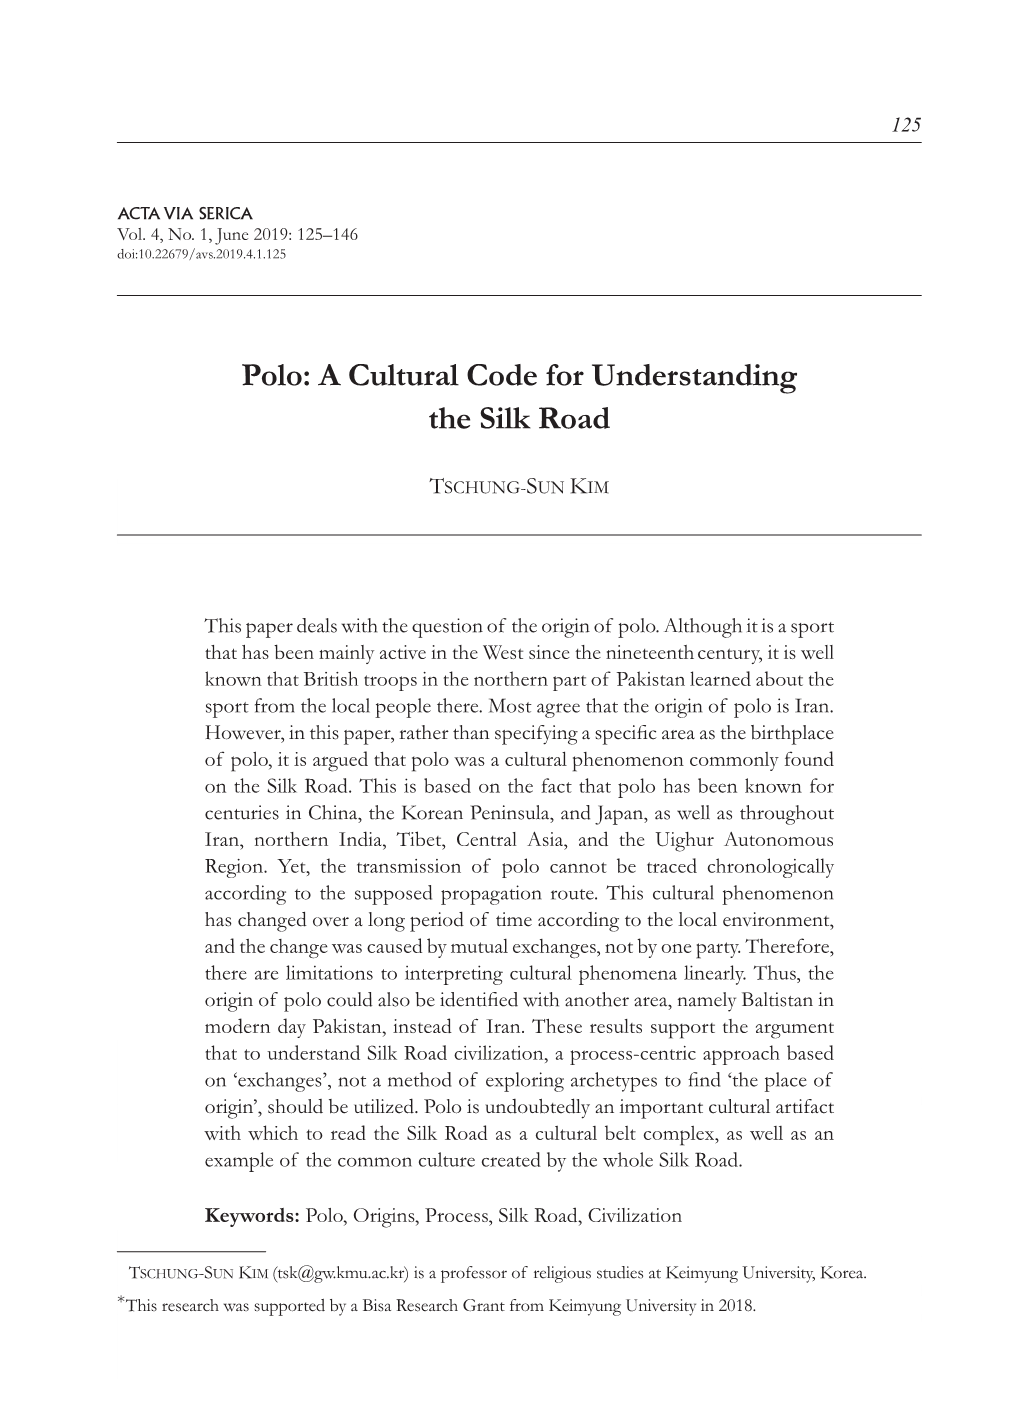 Polo: a Cultural Code for Understanding the Silk Road